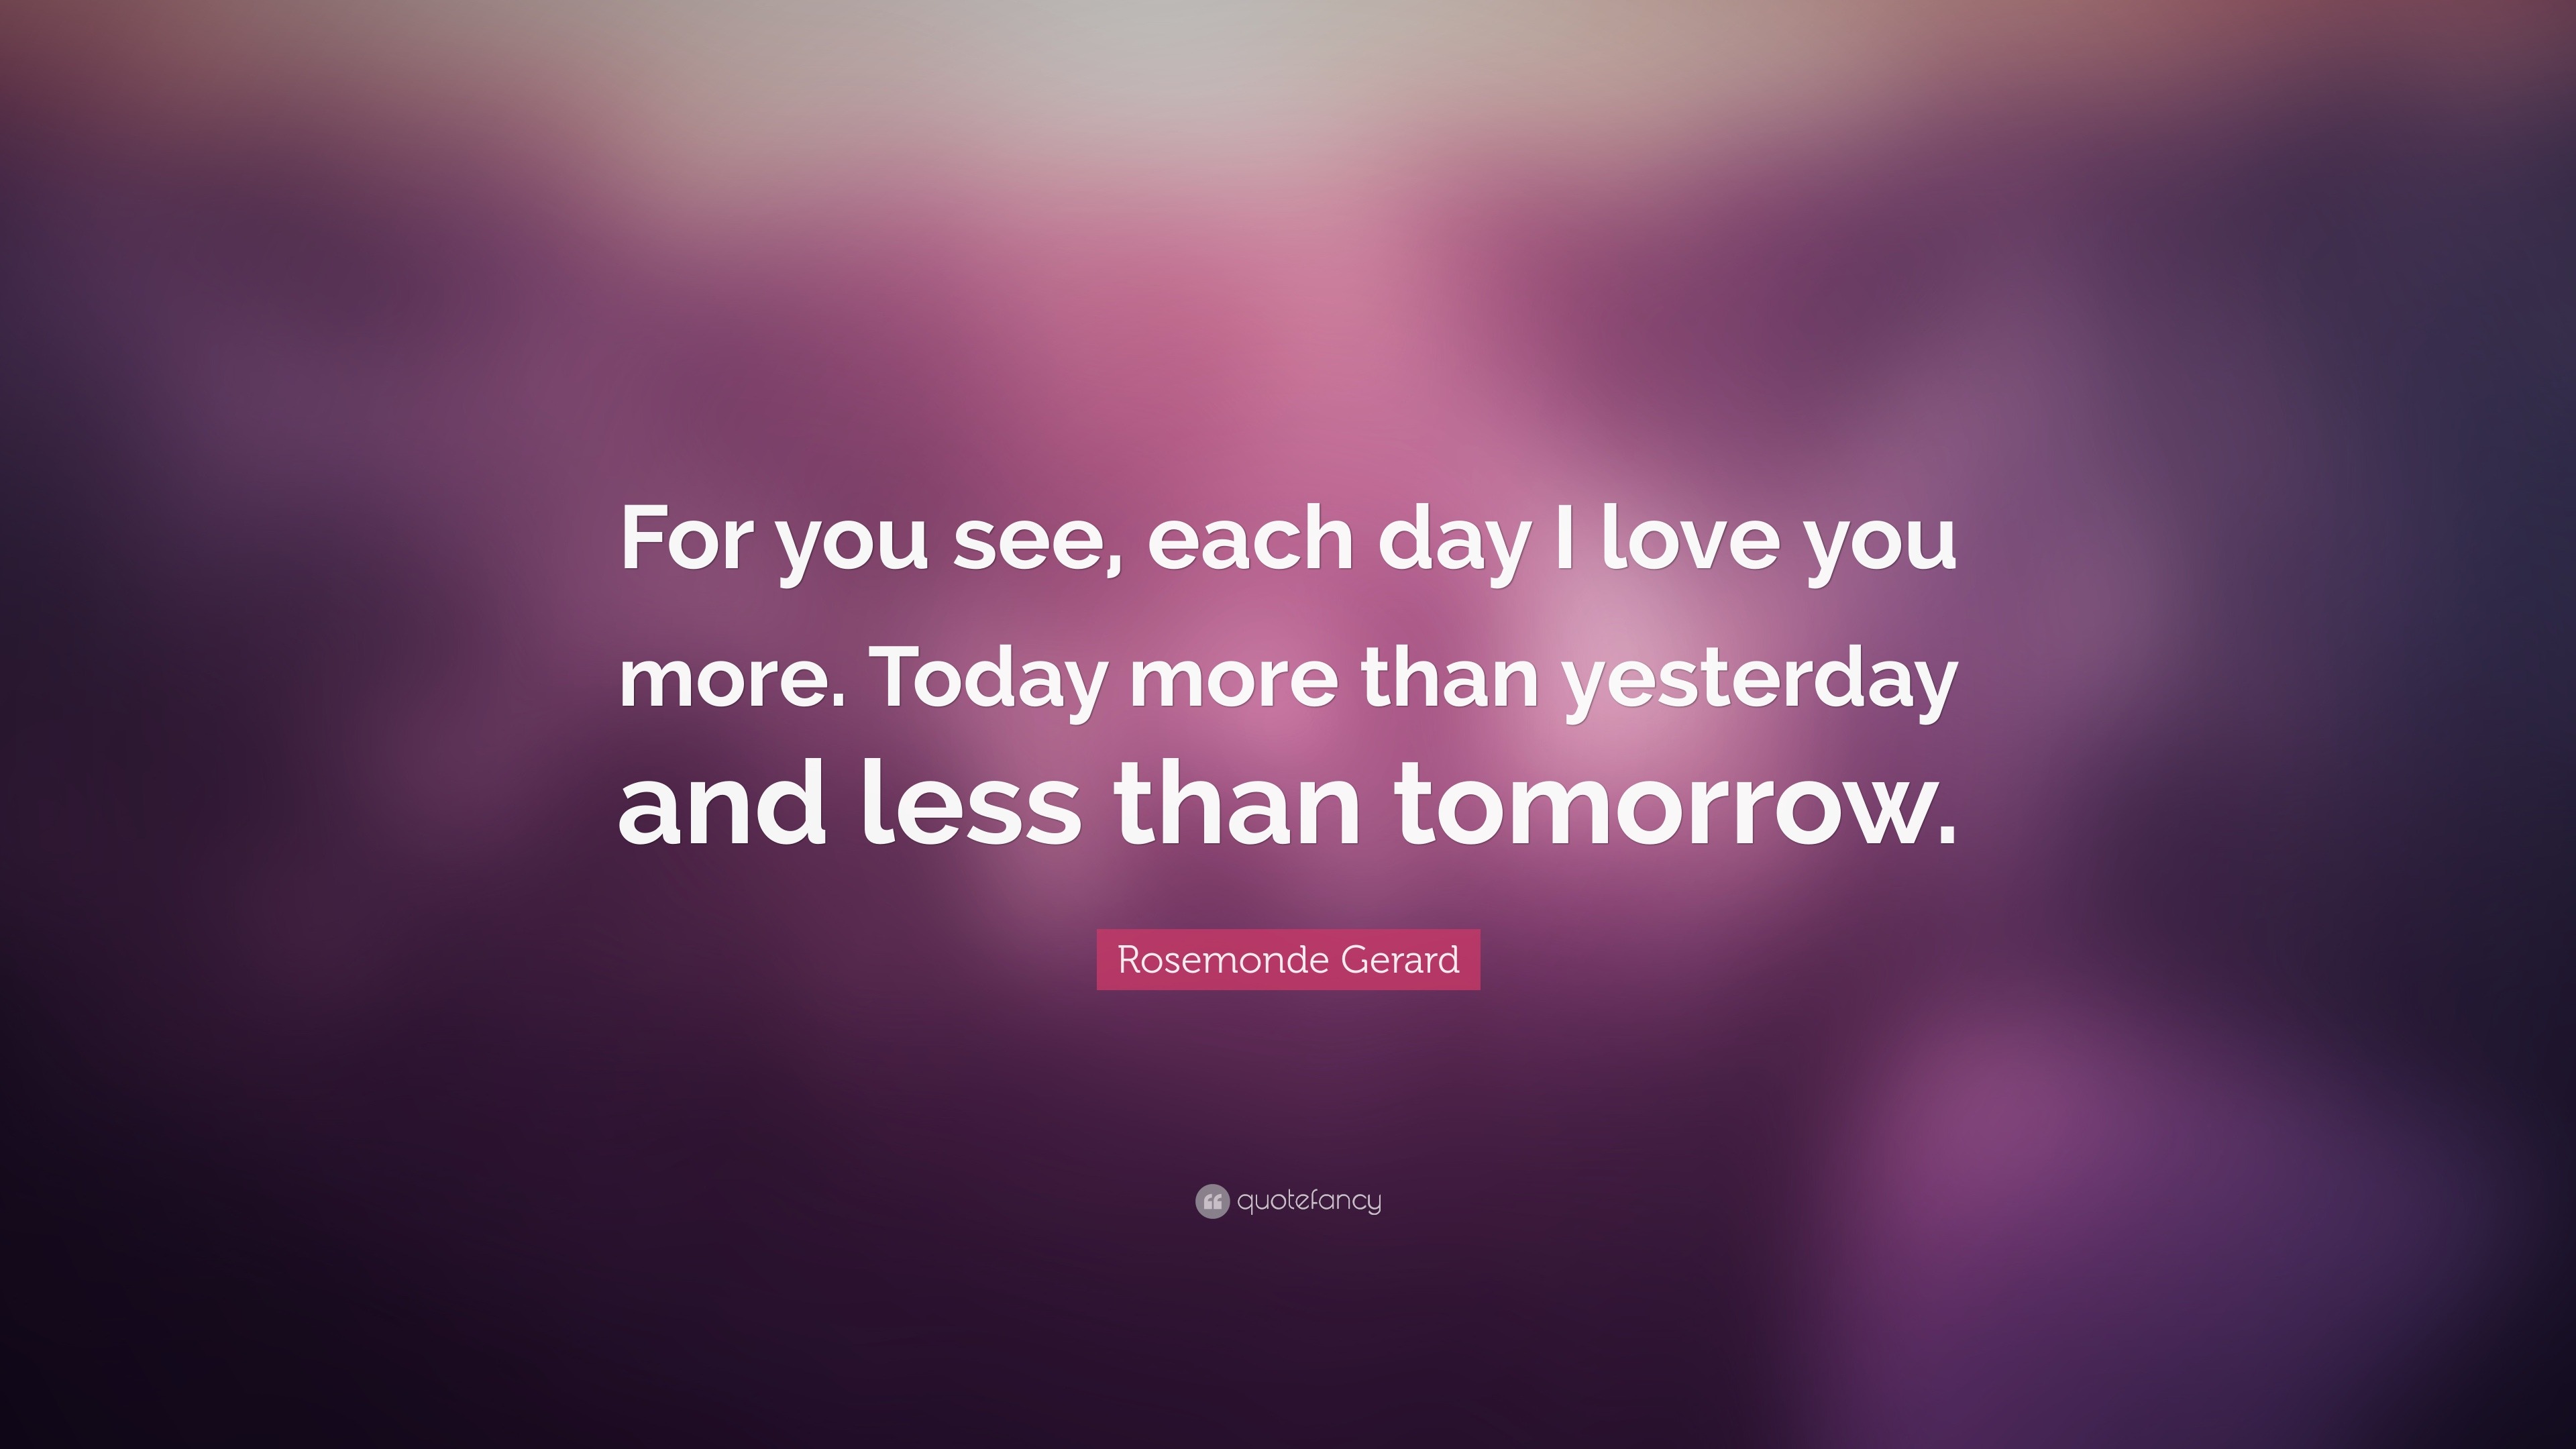 Rosemonde Gerard Quote For You See Each Day I Love You More Today More Than Yesterday